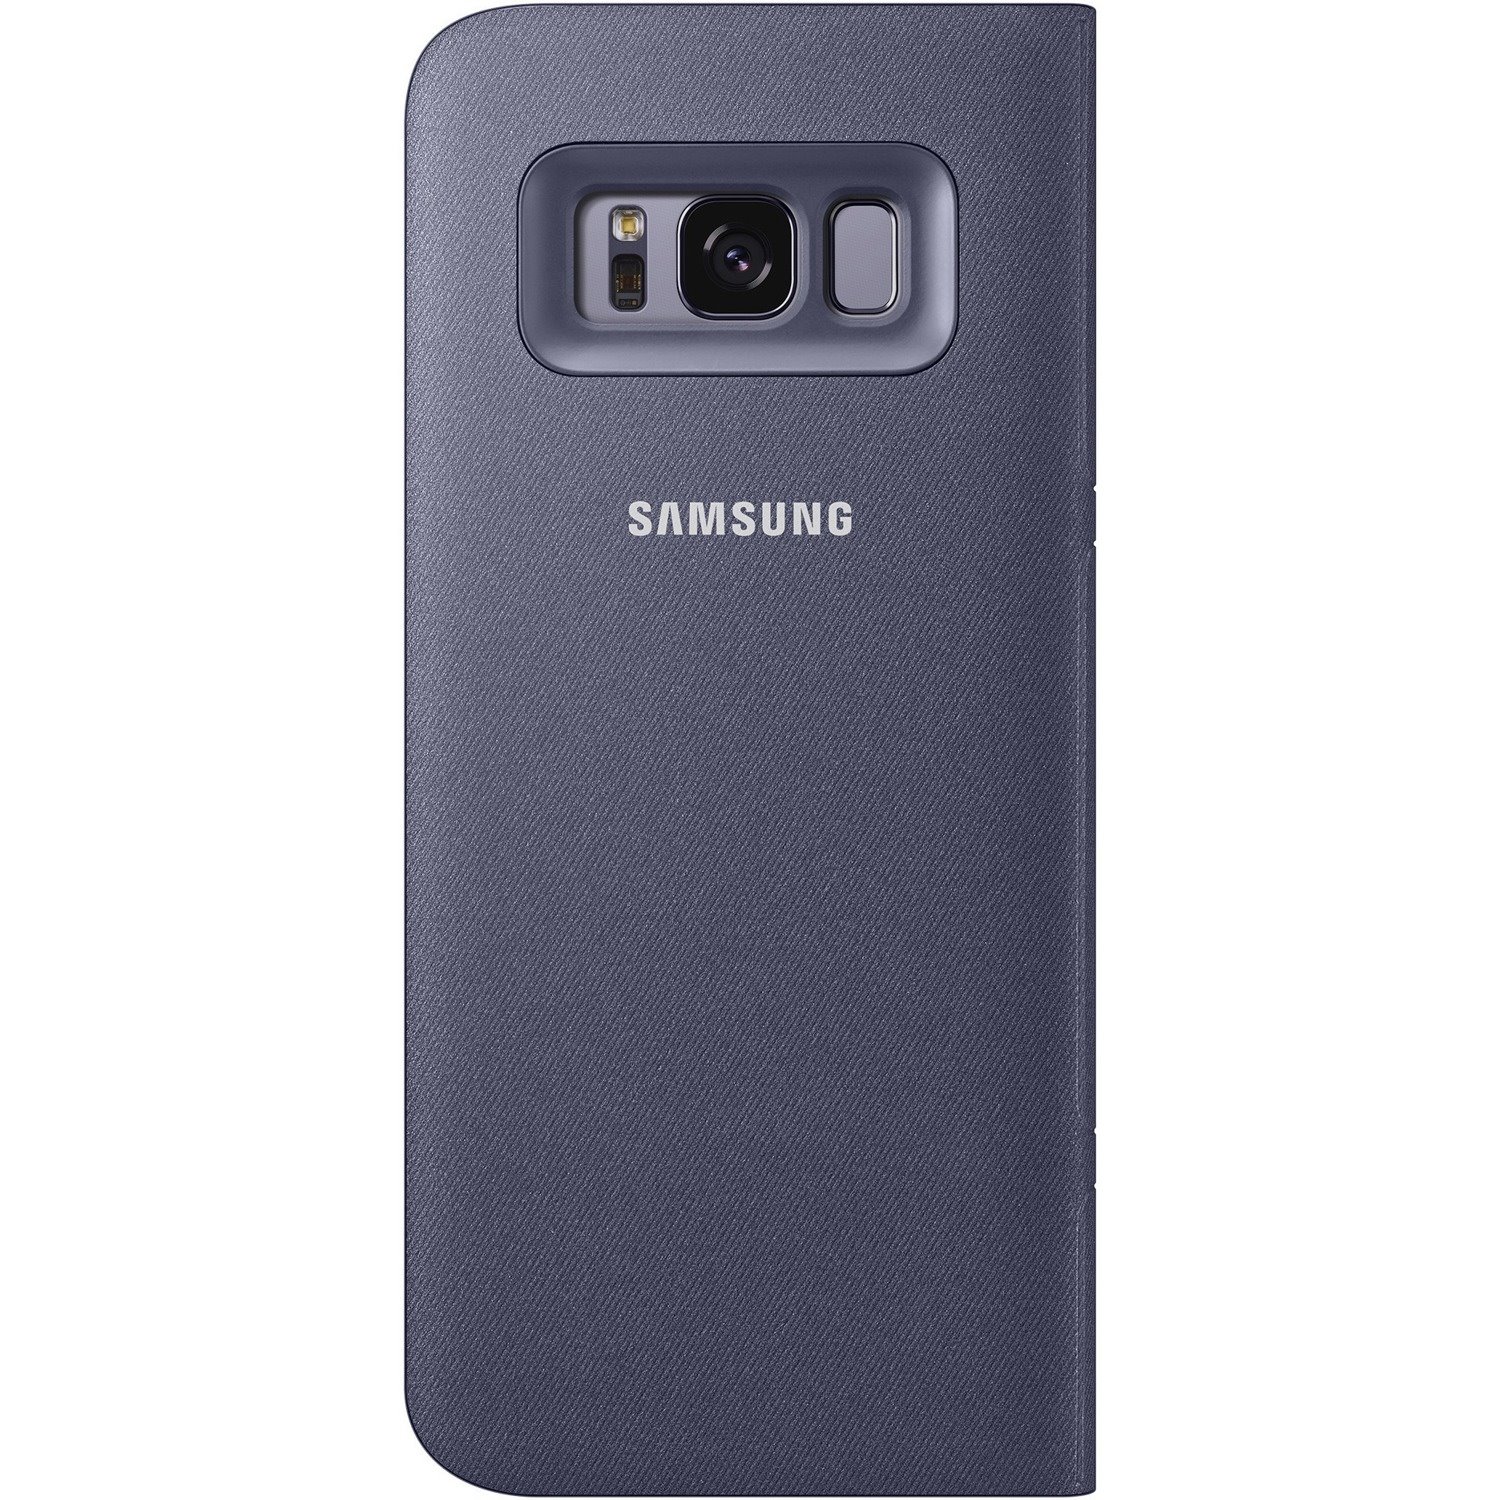 Samsung LED View Carrying Case (Flip) Samsung Galaxy S8 Smartphone - Violet